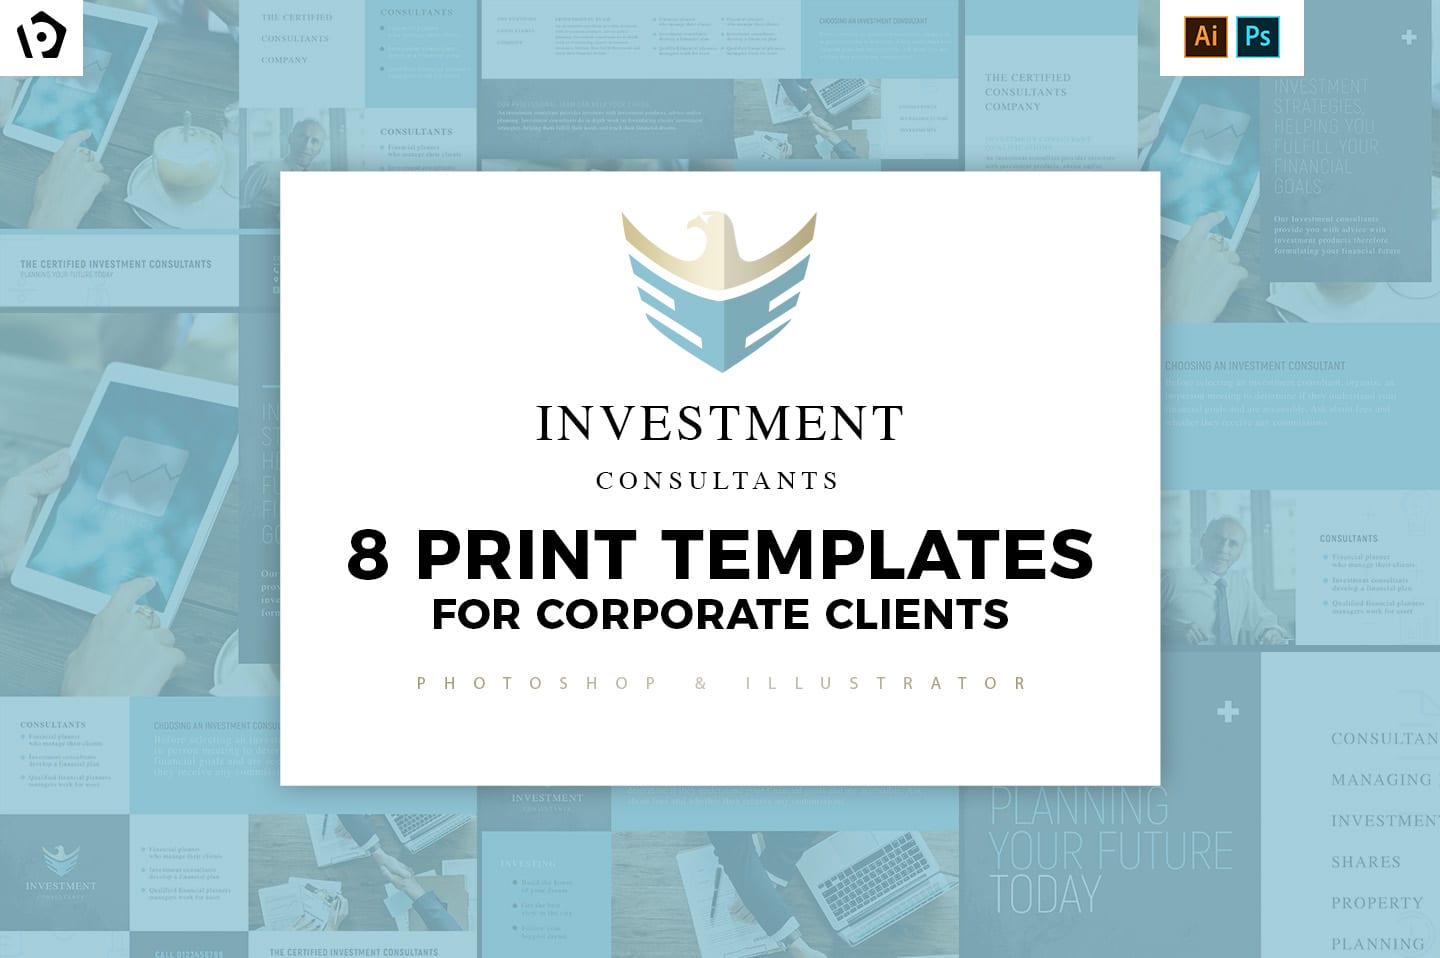 Investment Consultant Templates Pack